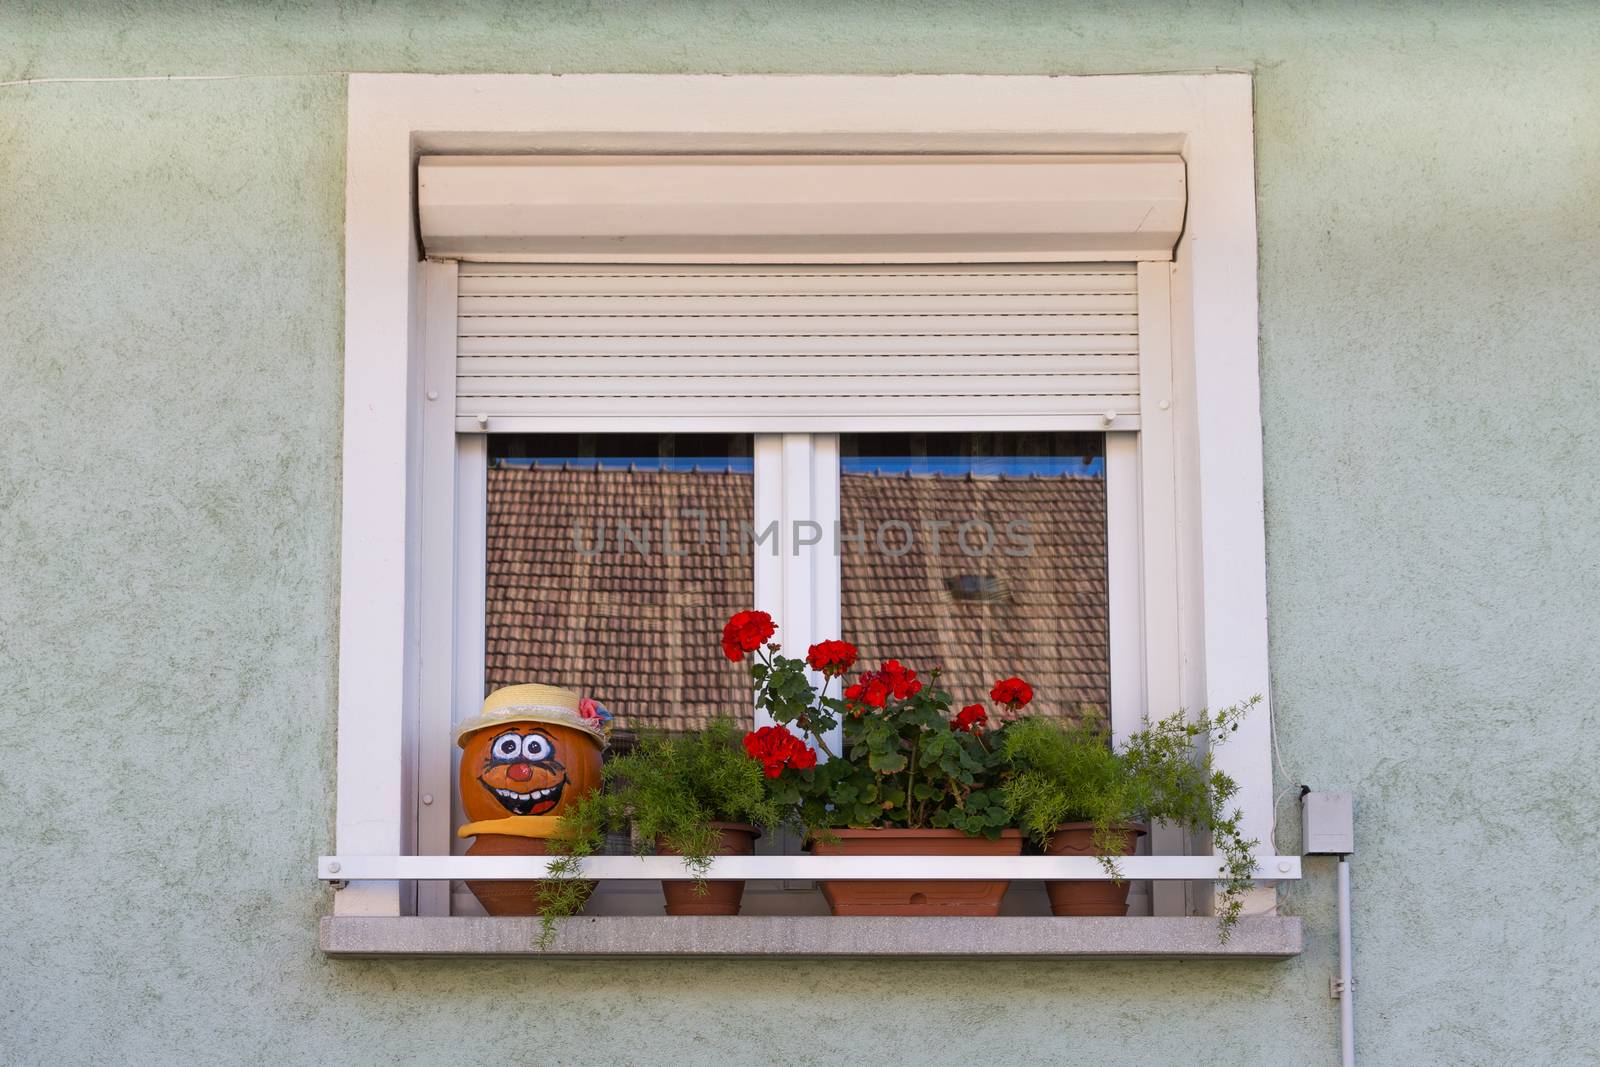 Window. Flowers on the window. Face of pumpkin on a windowsill. A window with shutters. The window of a private house